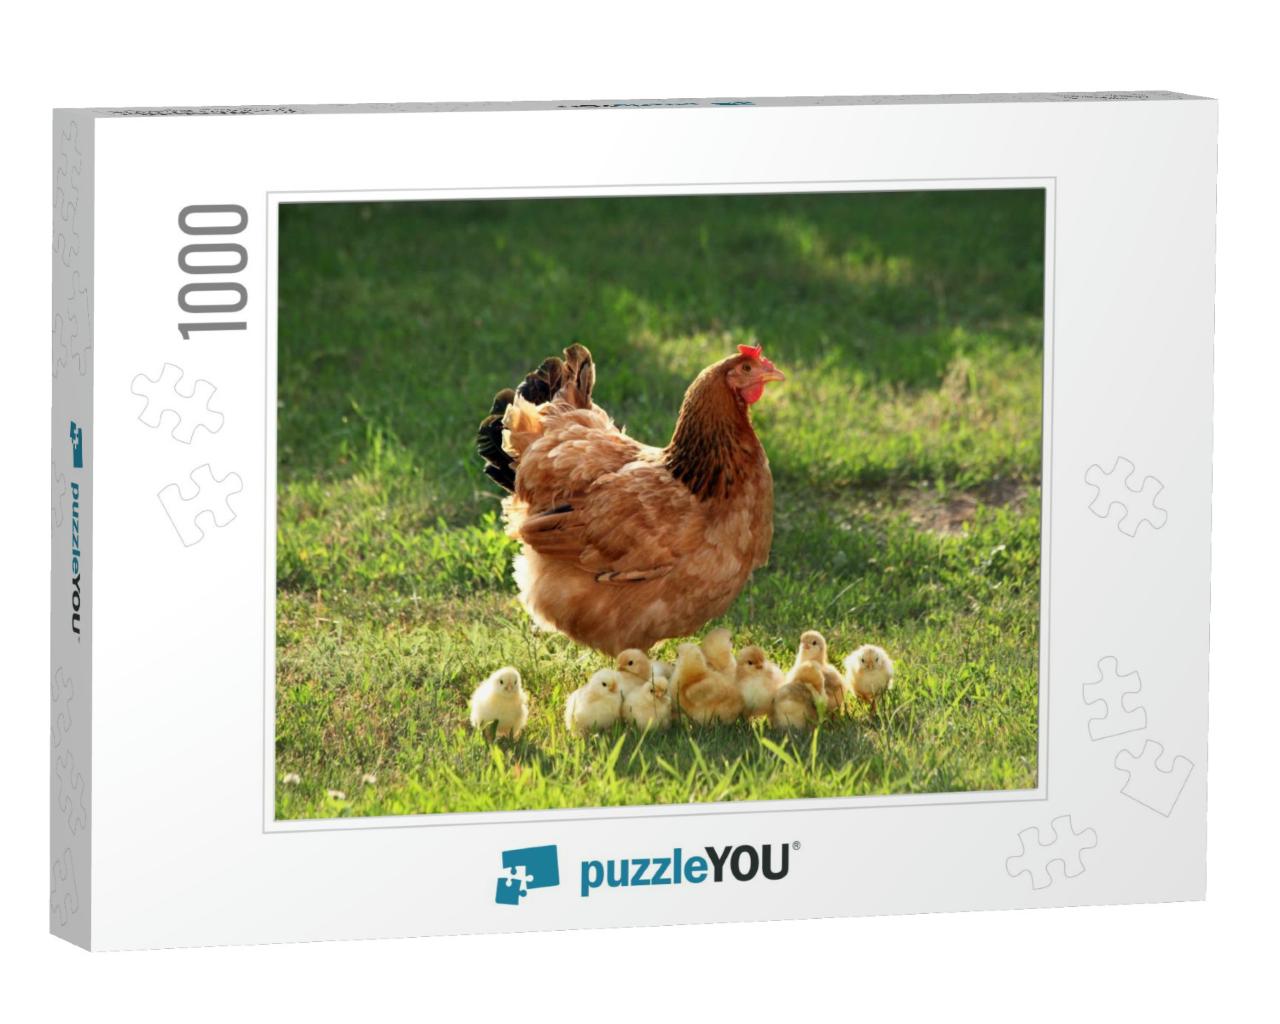 Mother Hen with Chickens in a Rural Yard. Chickens in a G... Jigsaw Puzzle with 1000 pieces